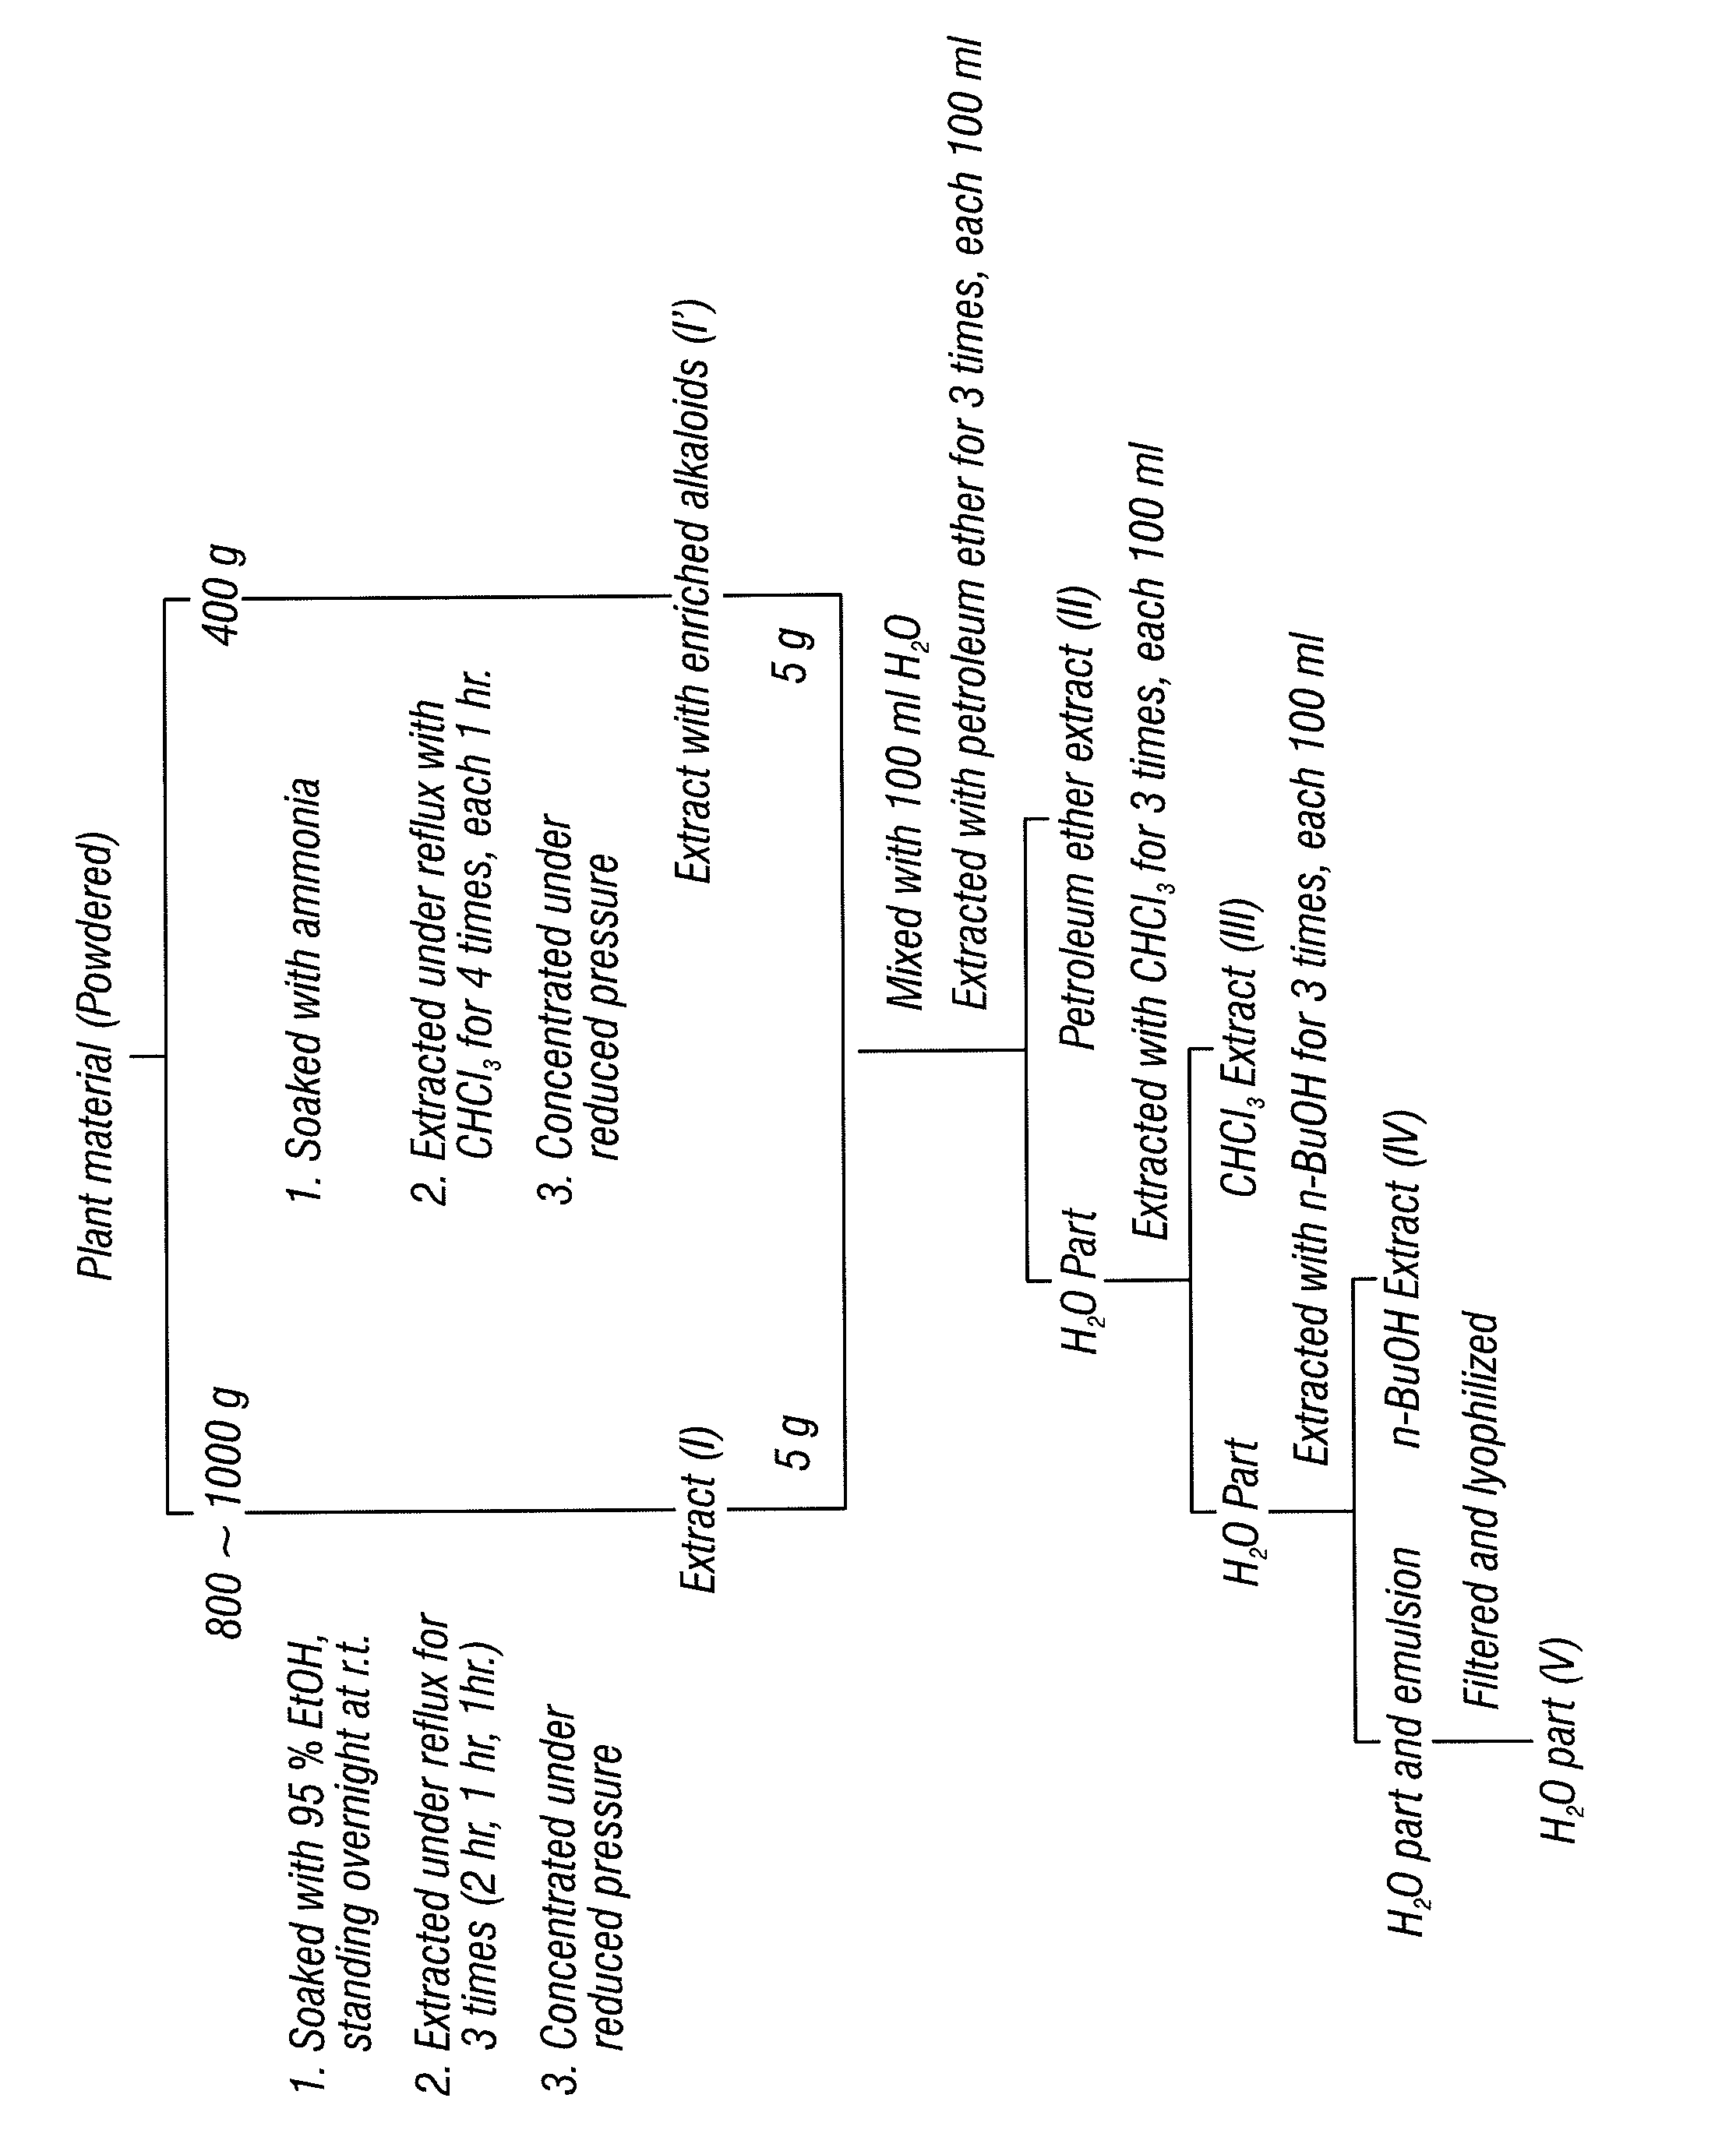 Compositions comprising docynia delavajy extract and/or Elaeagnus lancelotus extract